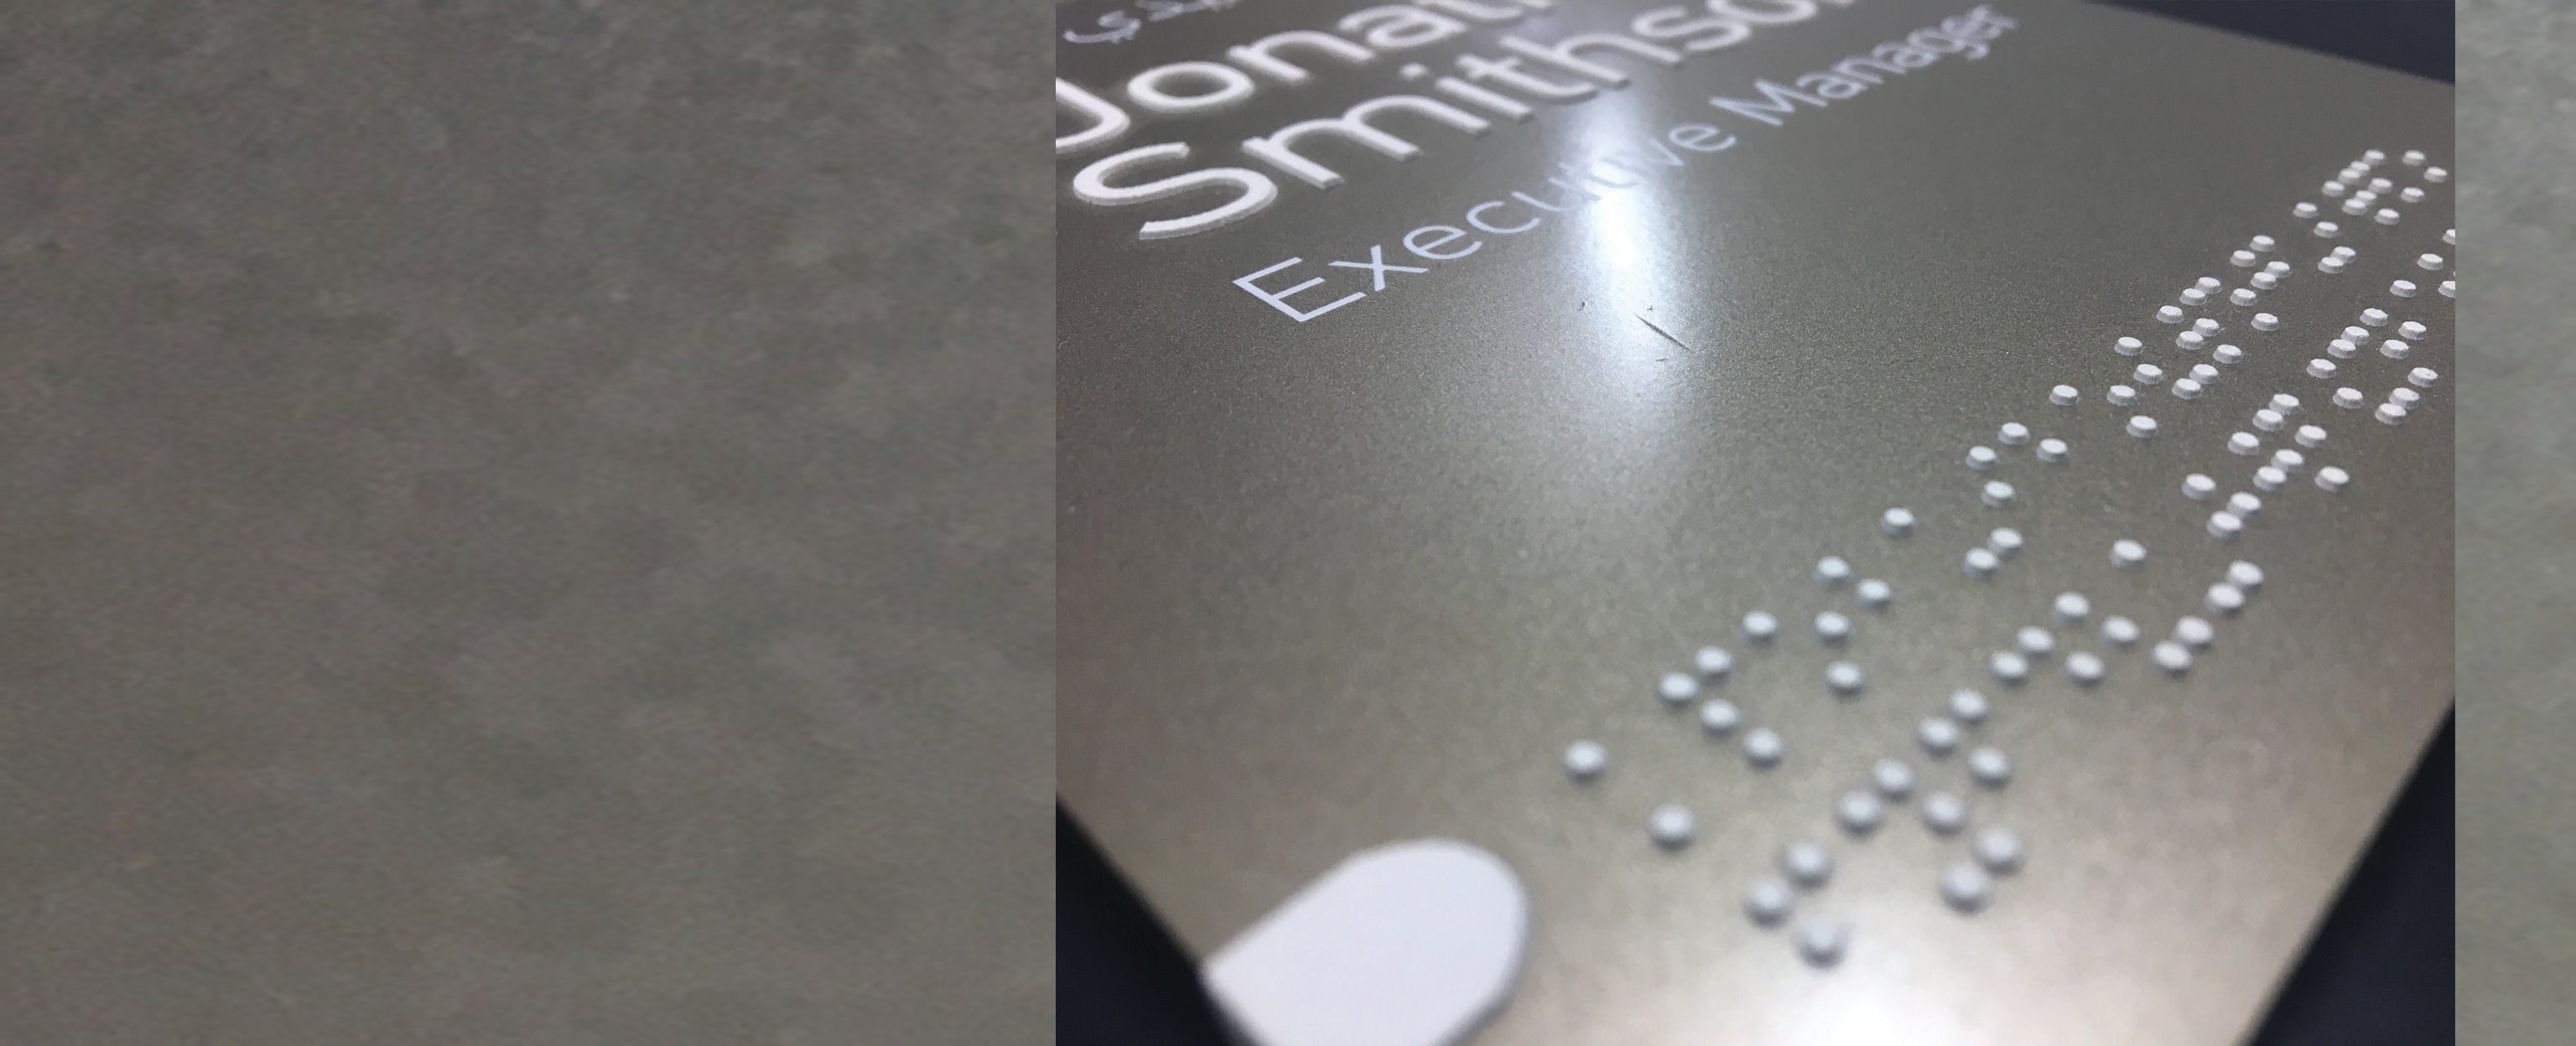 General Braille & Tactile Signs